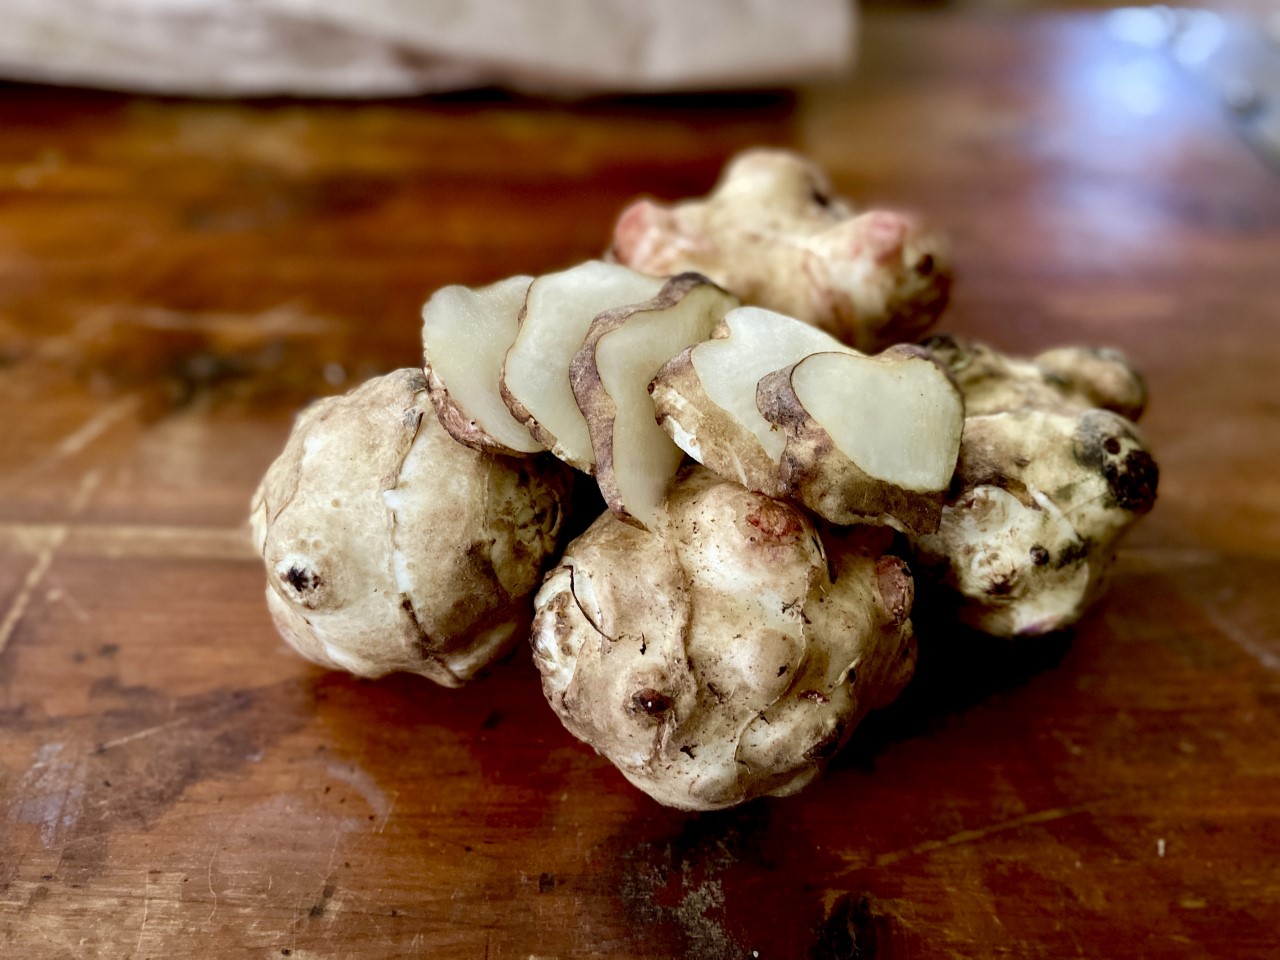 Our root-to-leaf ingredient this month is sunchoke